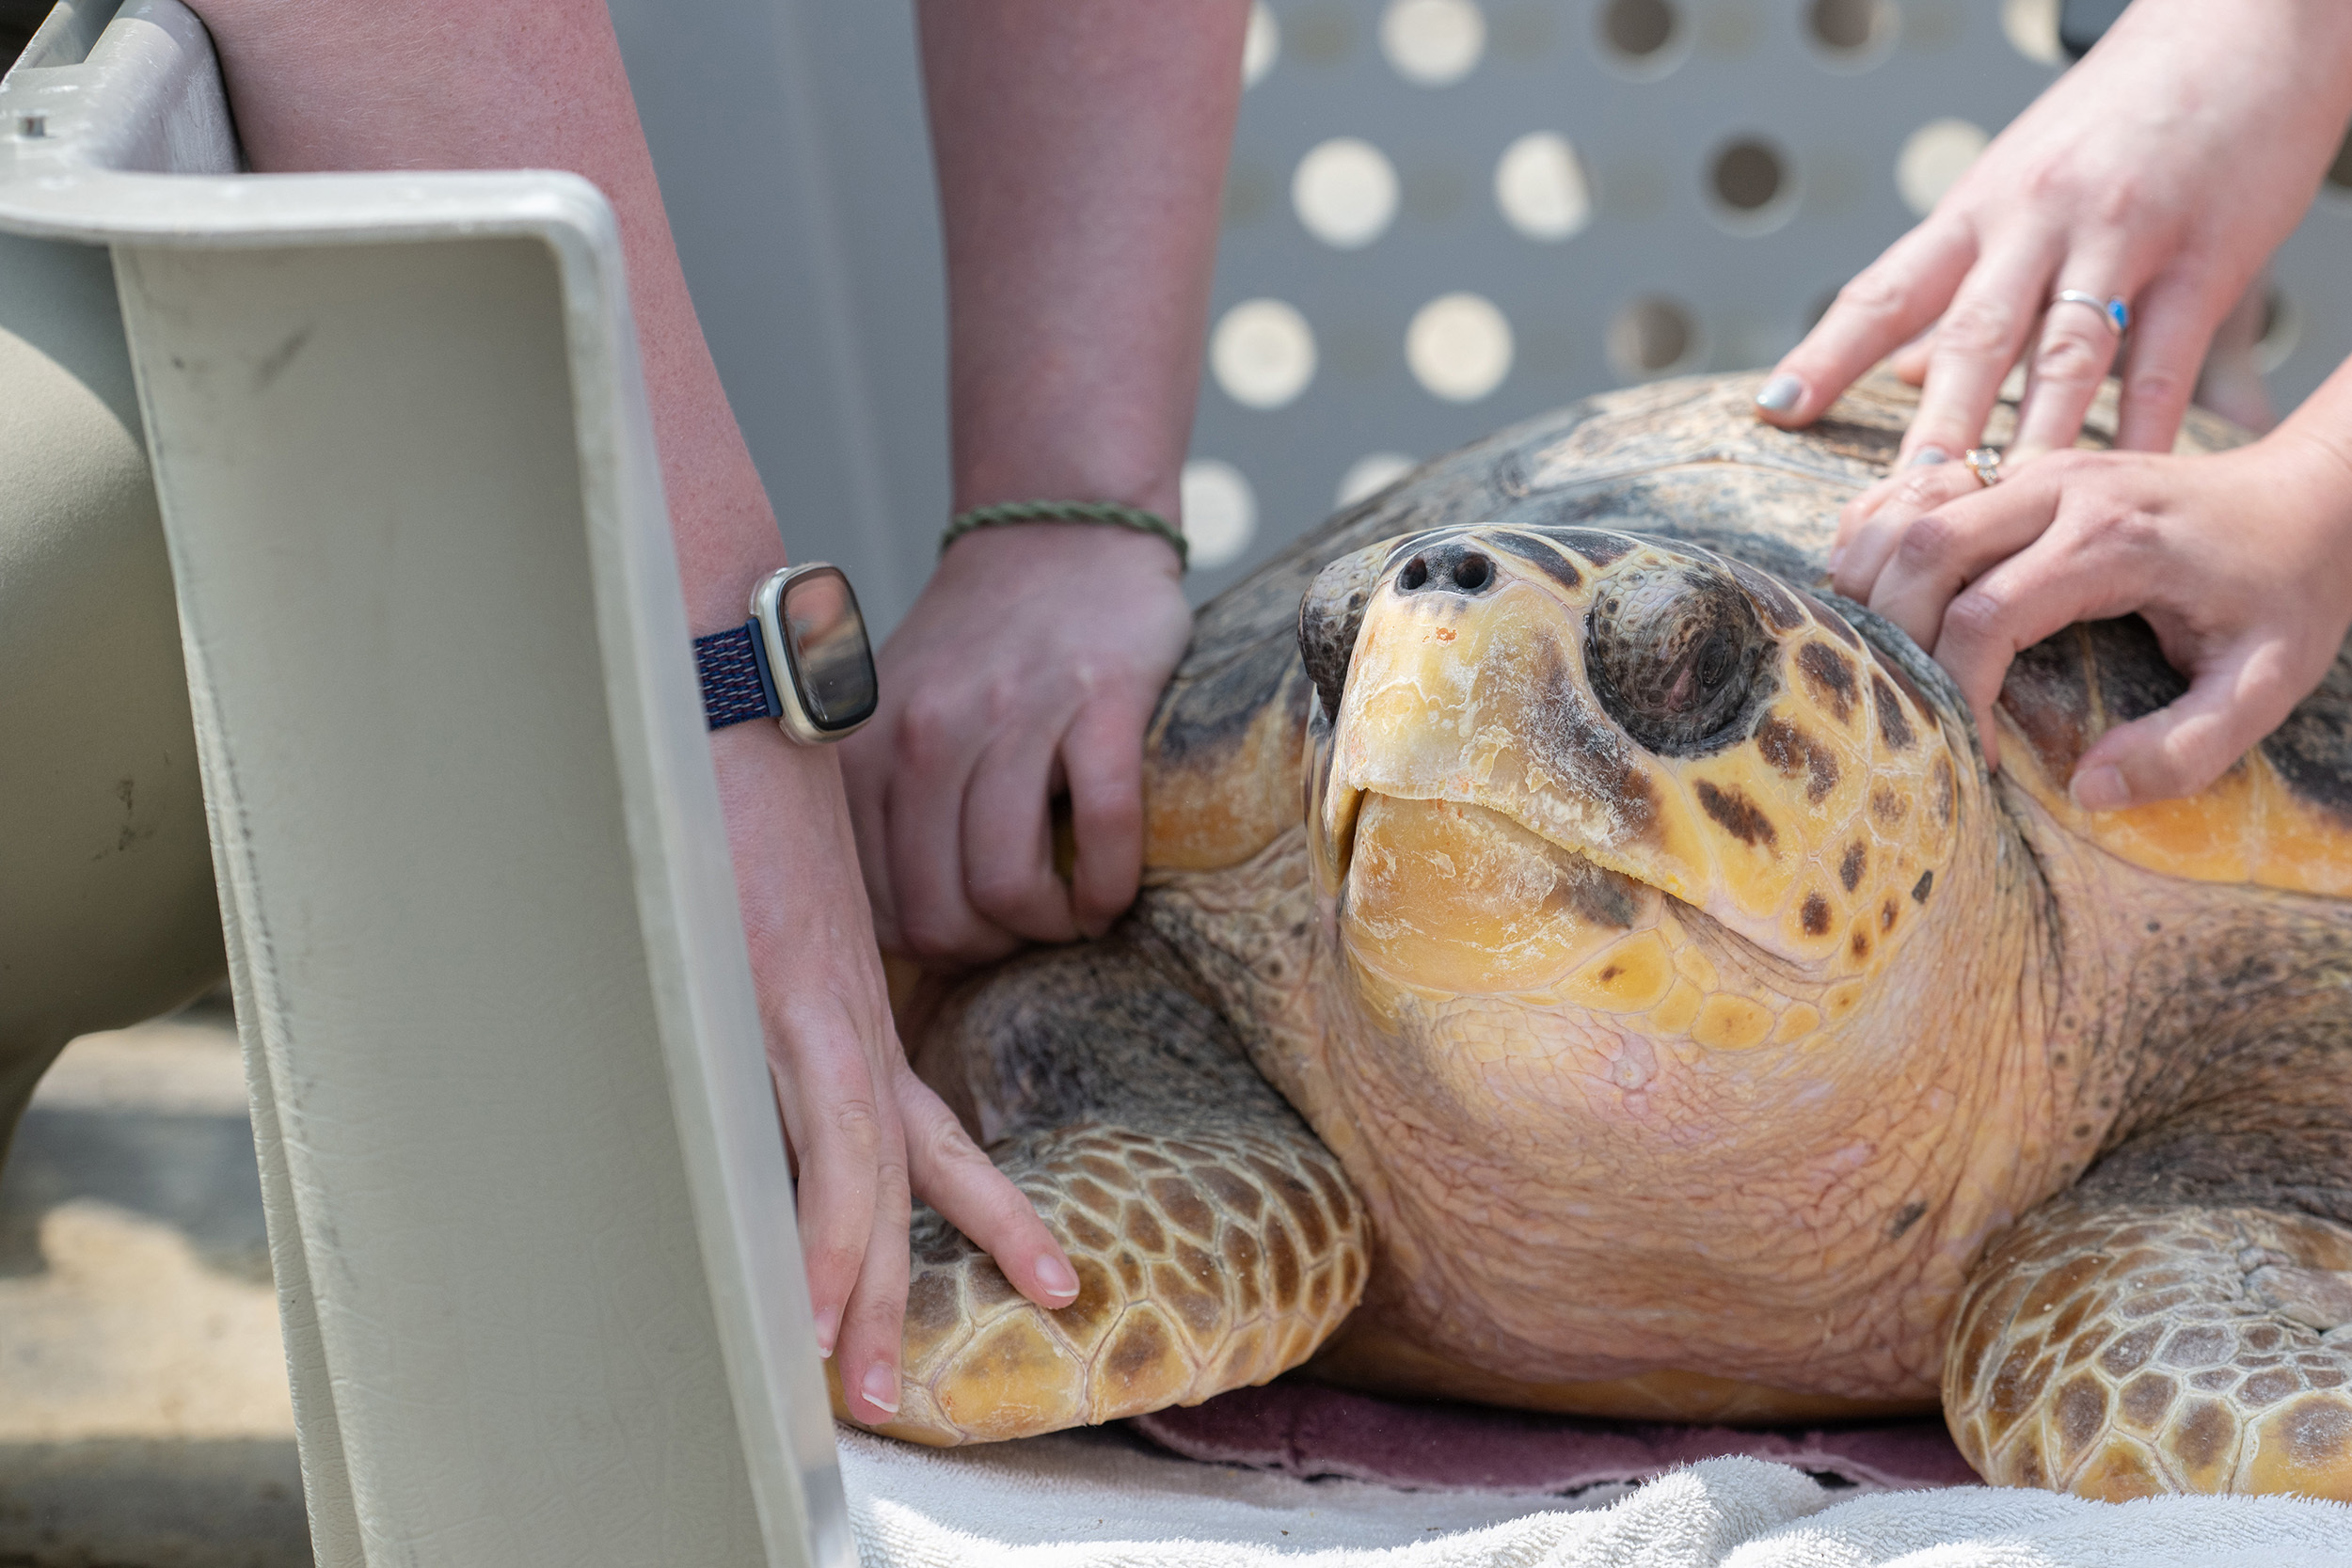 Loggerhead Sea Turtle, Glockenspiel, Resting in a Carrier with Multiple Hands on Him During His Release